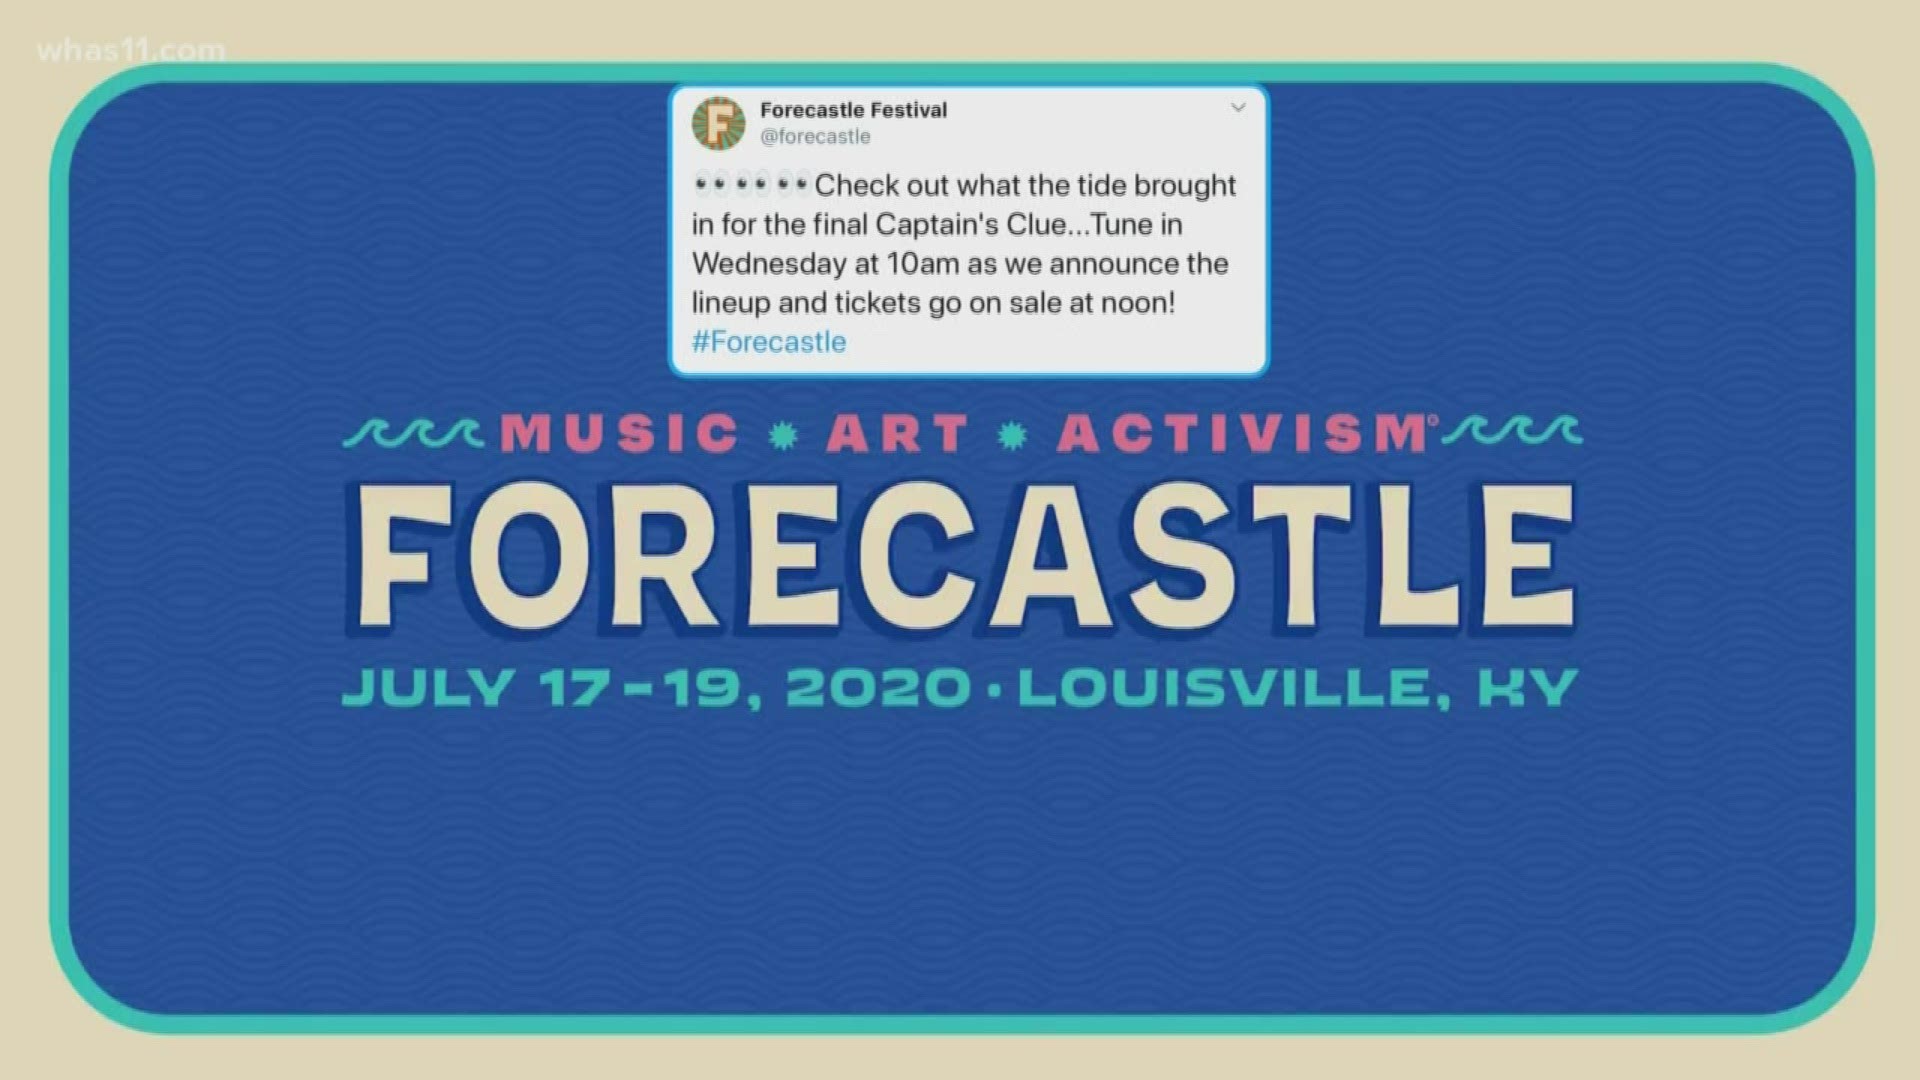 Forecastle Festival will announce its 2020 lineup Feb. 12 at 10 a.m.